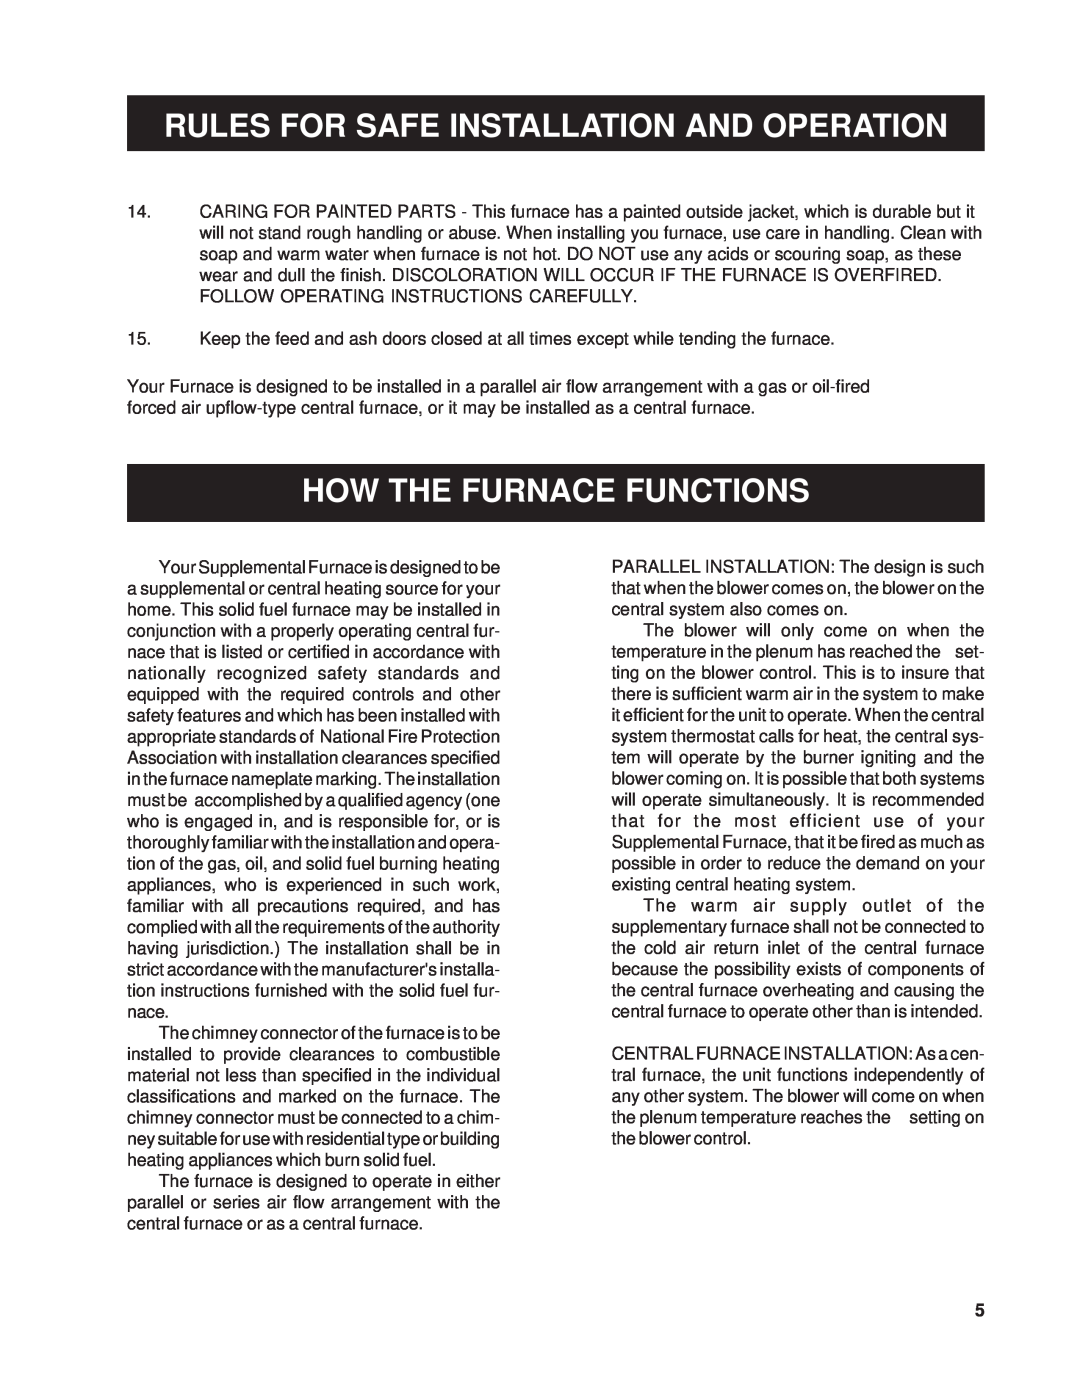 United States Stove 1200Q owner manual How The Furnace Functions, Rules For Safe Installation And Operation 